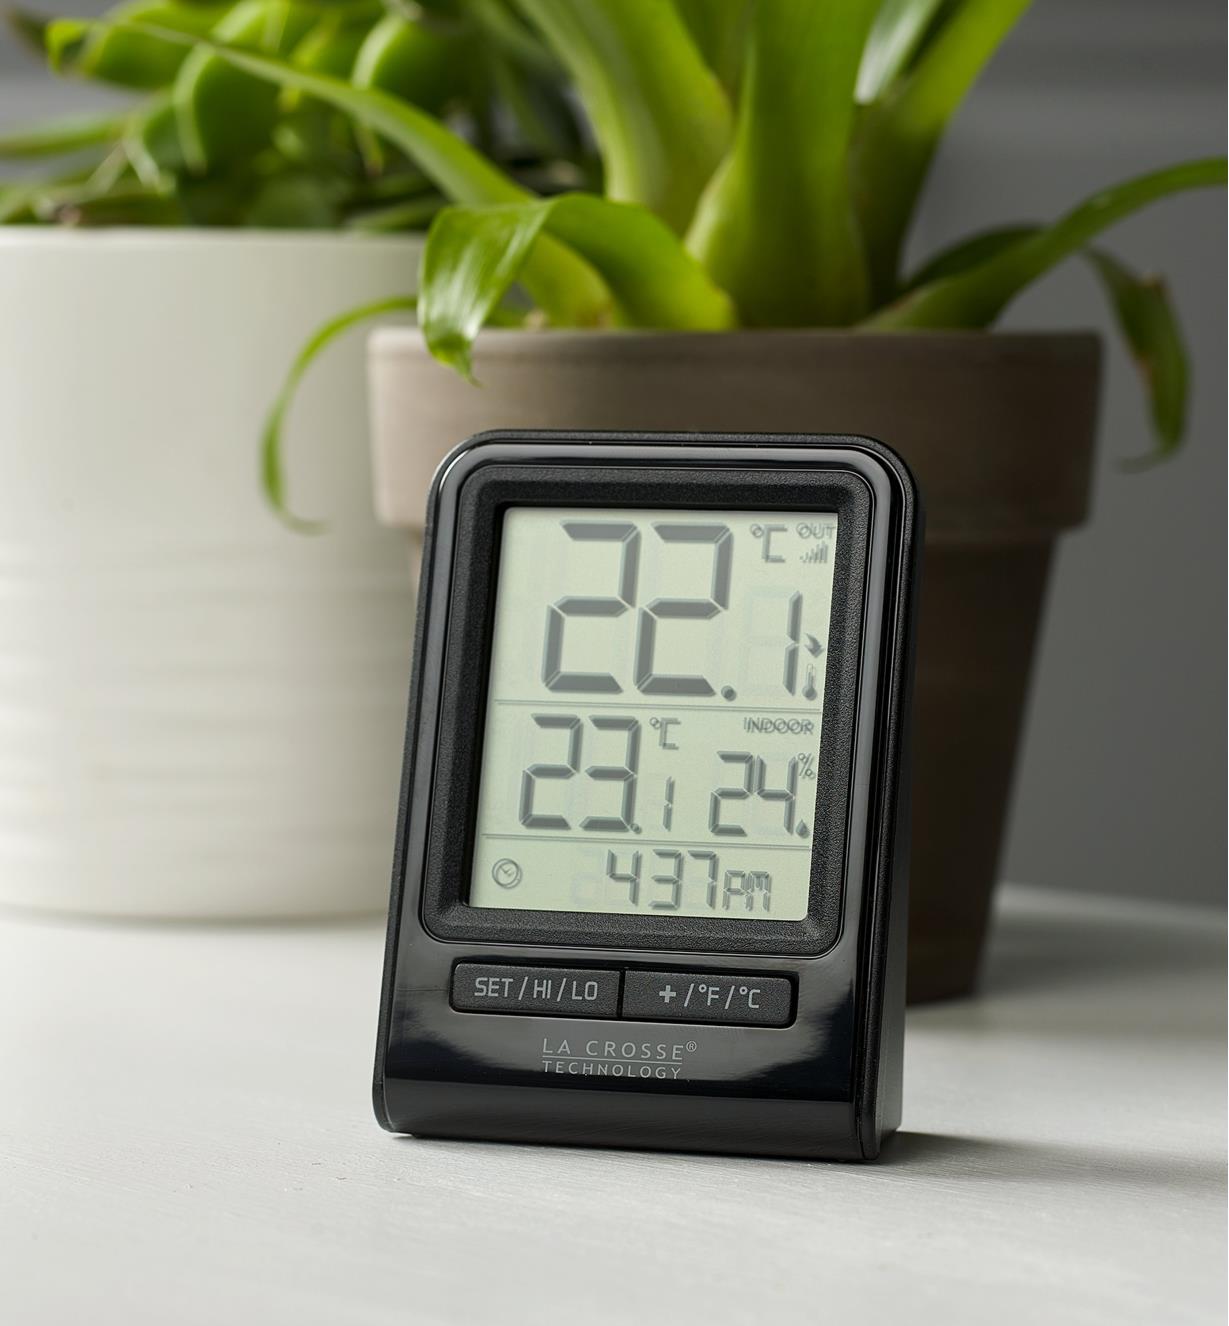 The compact wireless thermometer display shows temperatures, relative humidity and time of day